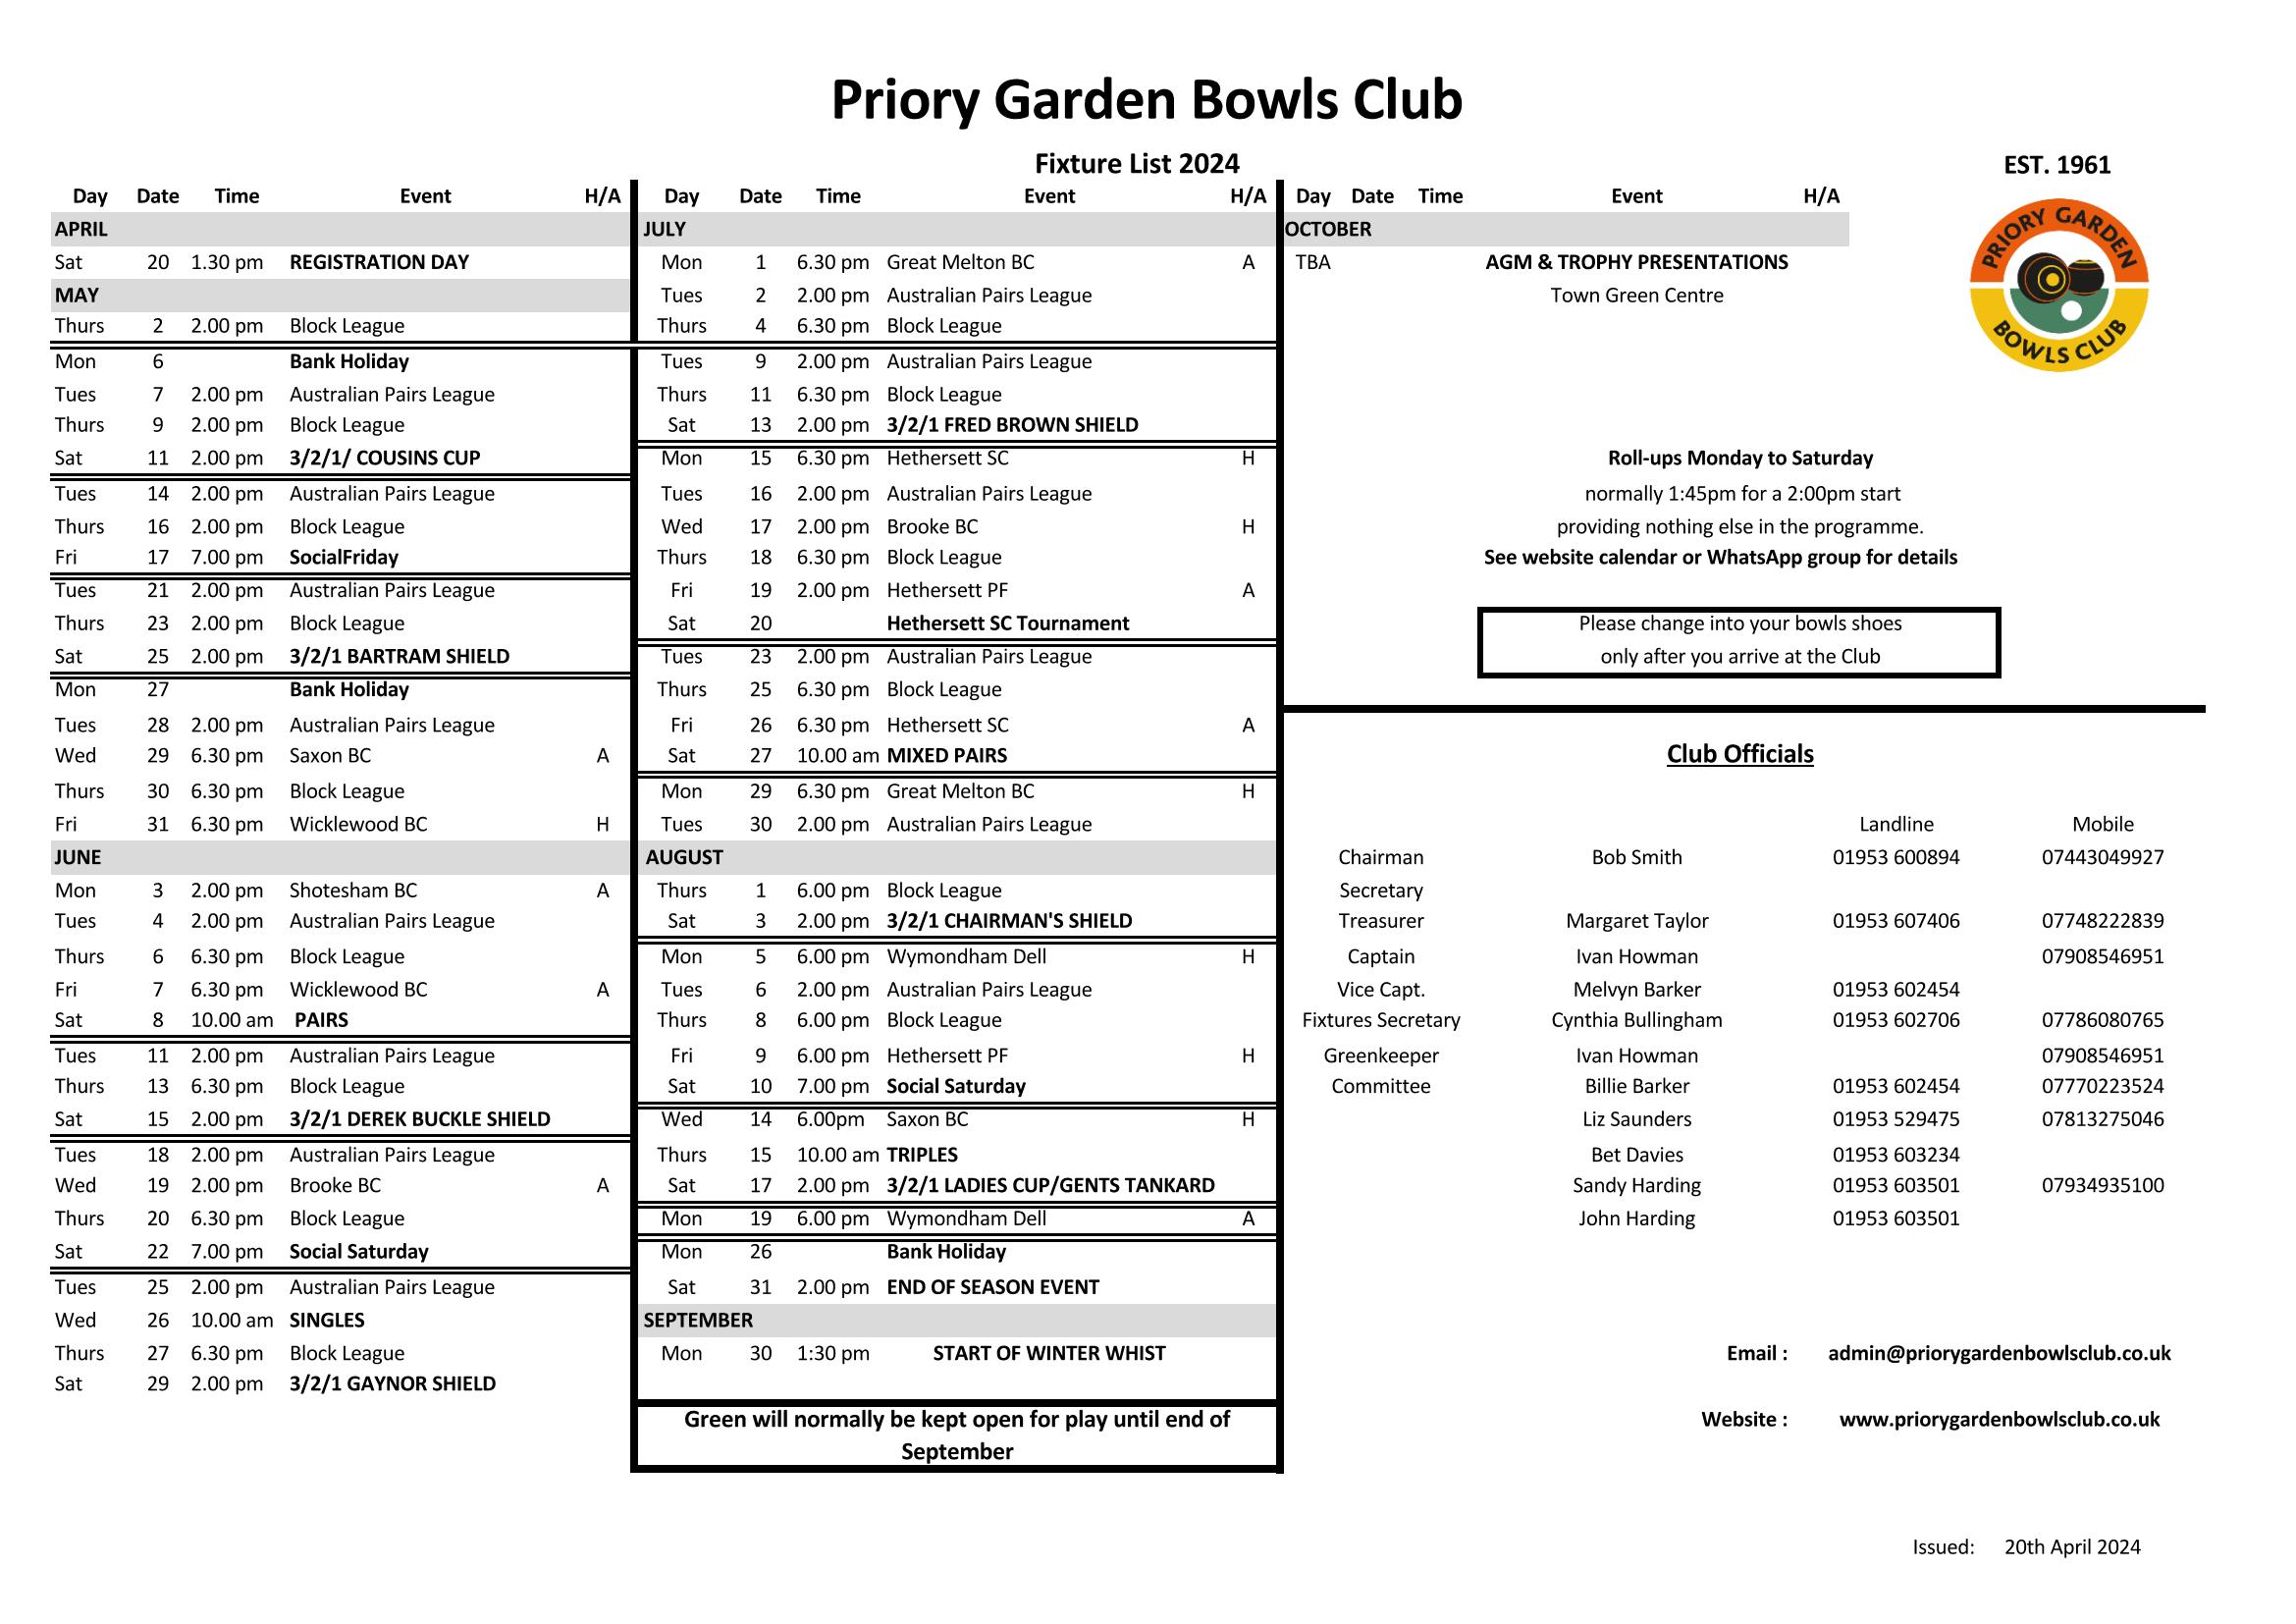 Priory Garden Bowls Club Fixtures & Roll-ups